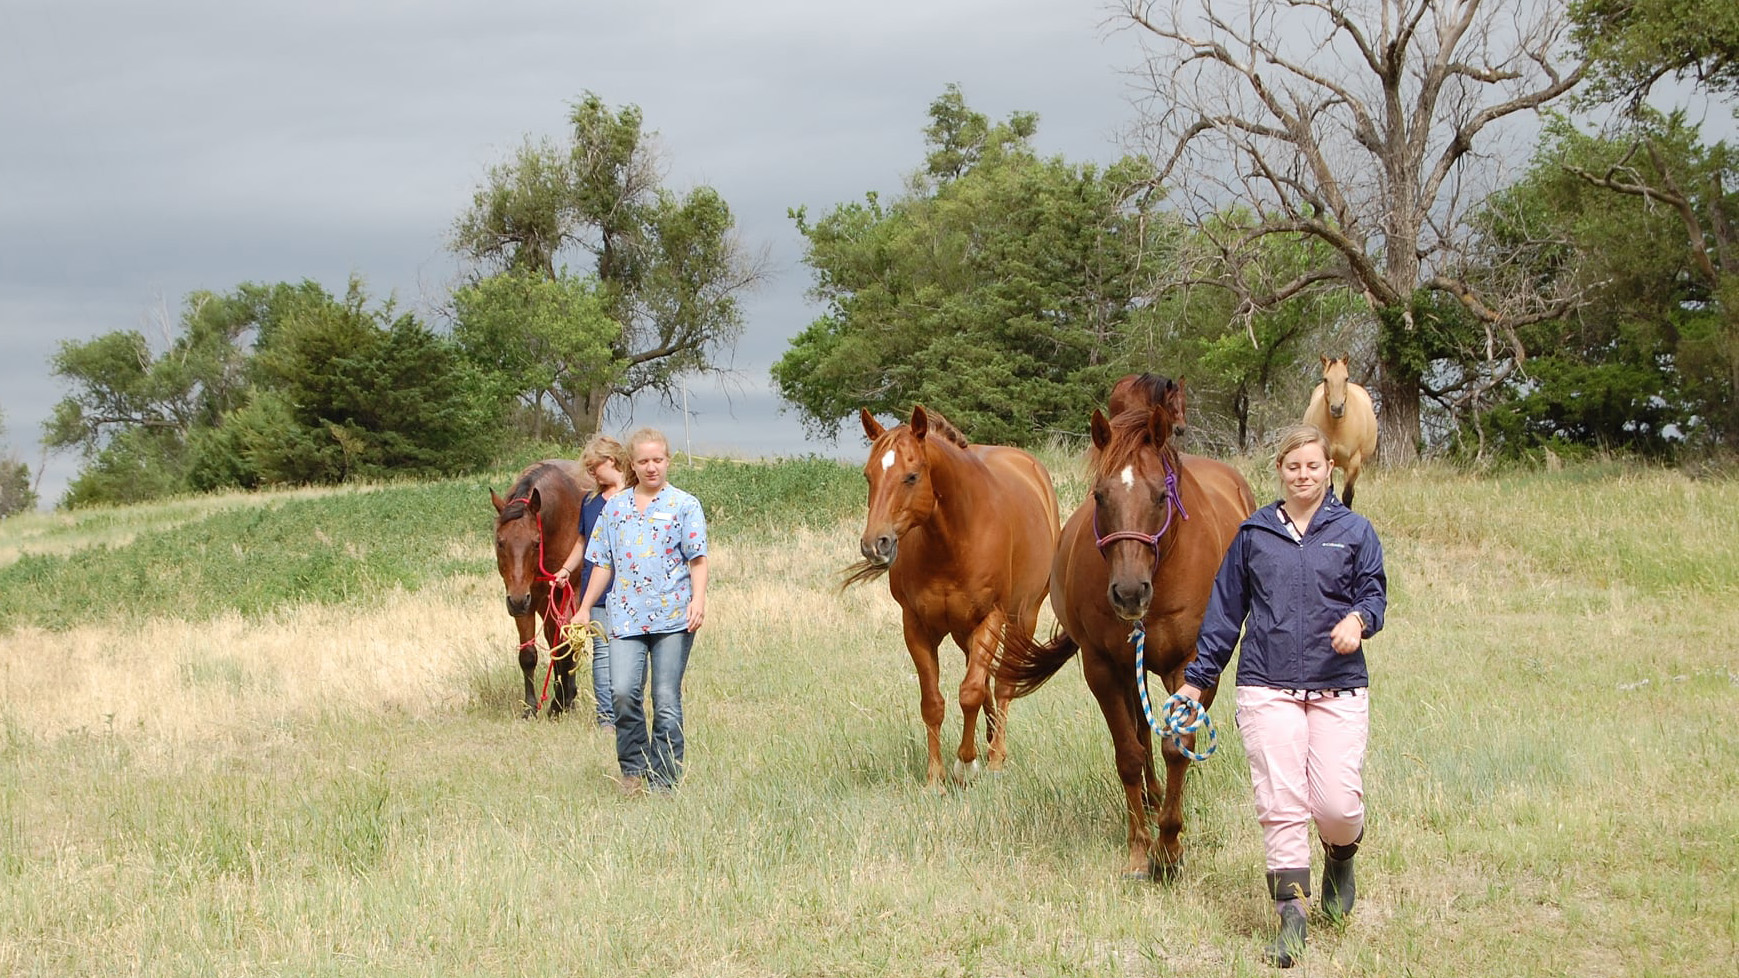 Veterinary Technology students bring horses in from pasture for a summer class in June 2020. (Chrissy Barnhart / NCTA photo)